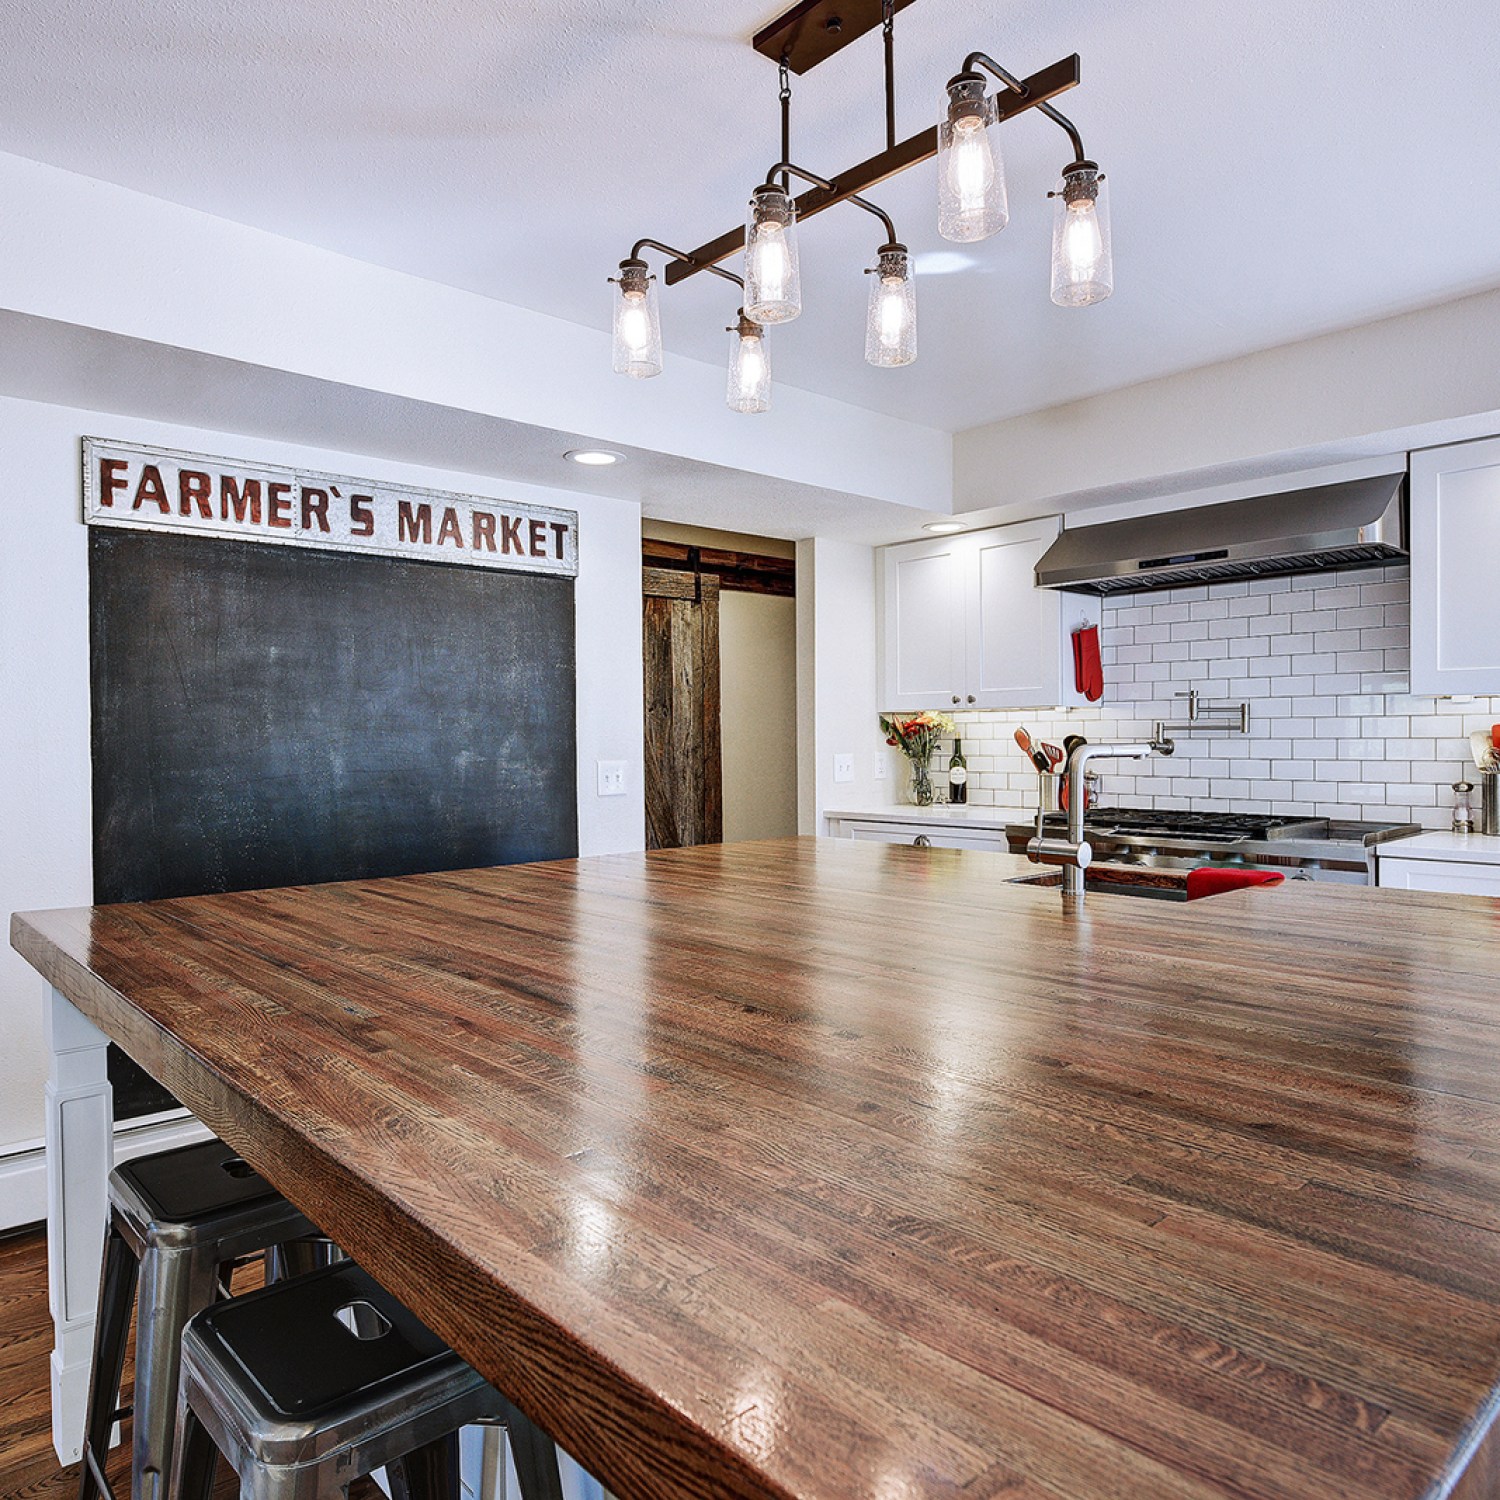 Large wooden kitchen island in front of chalk board